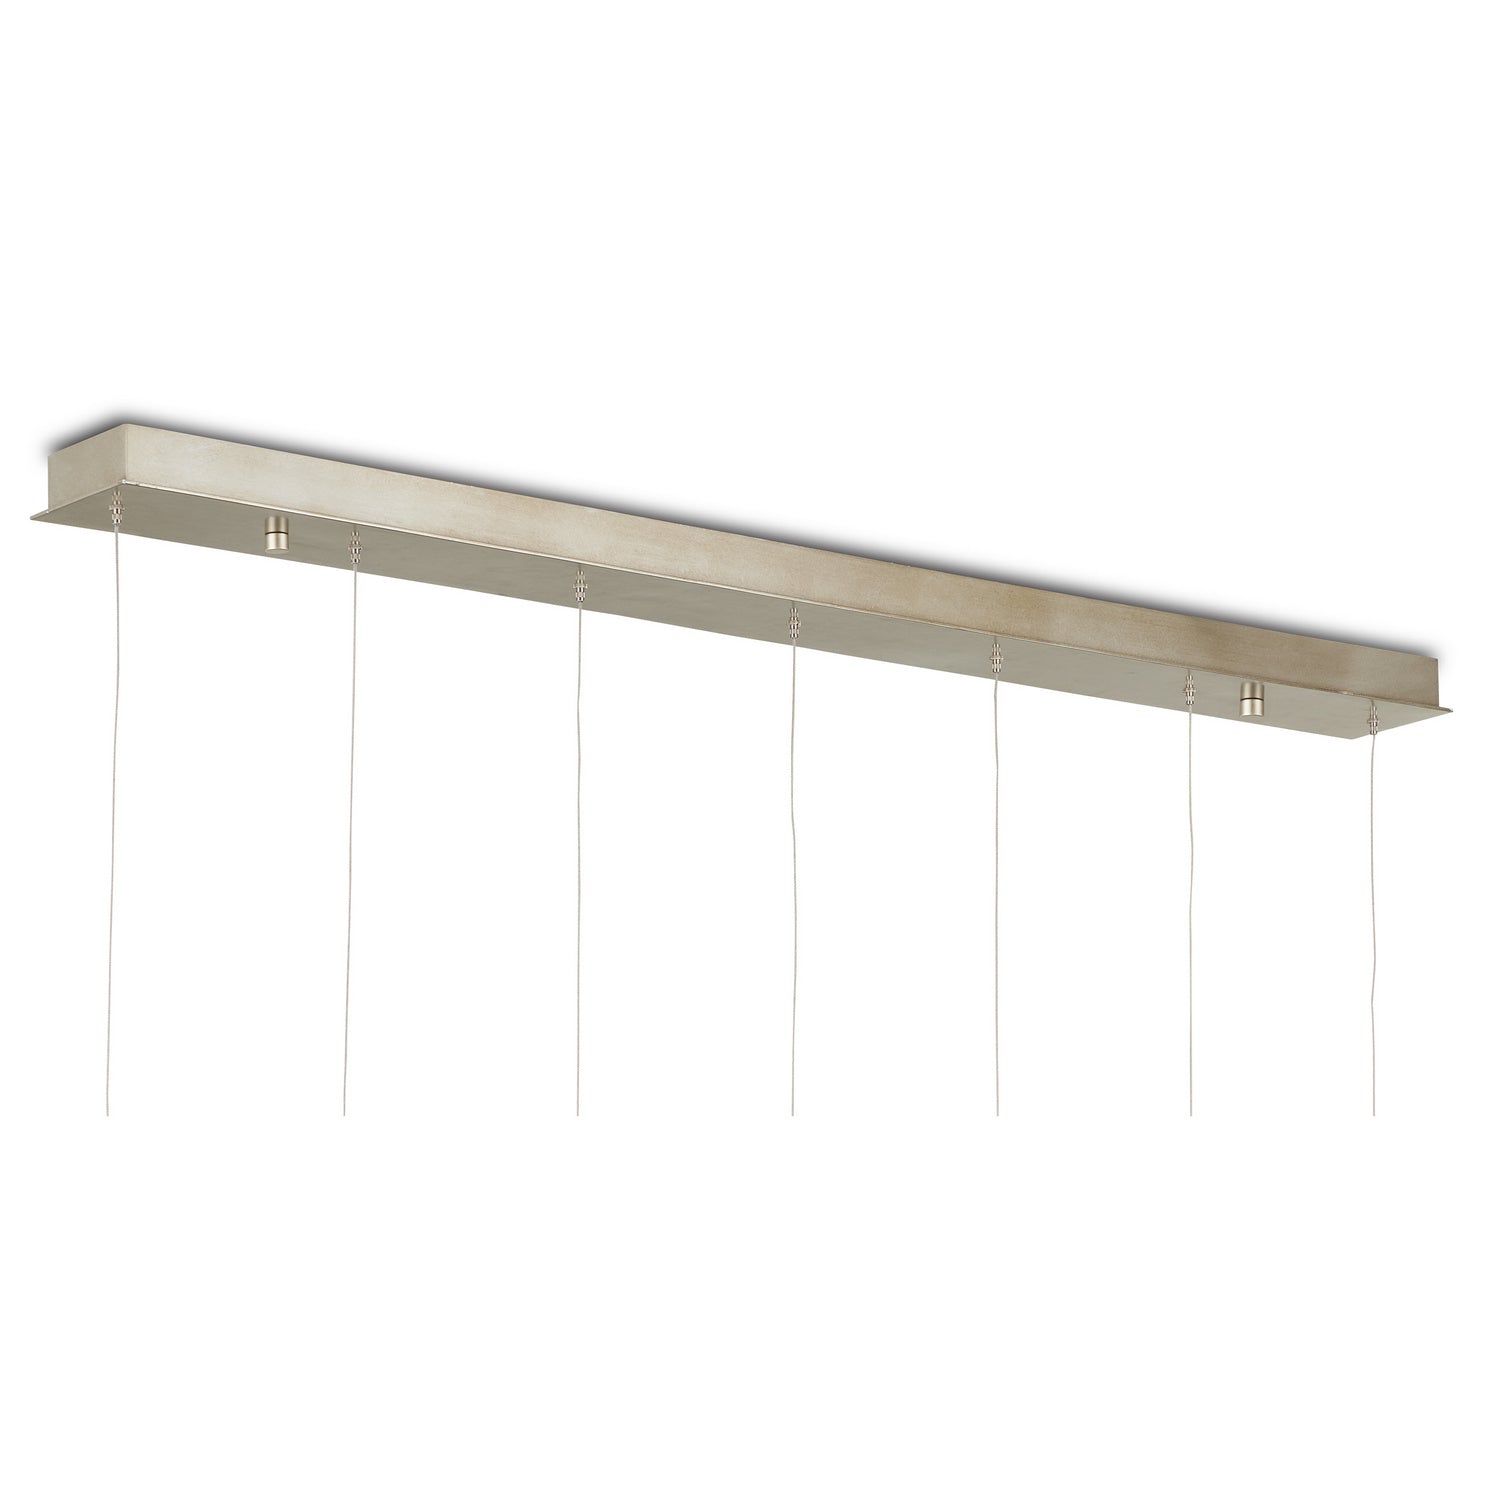 Seven Light Pendant from the Iota collection in Antique Brass/Silver finish